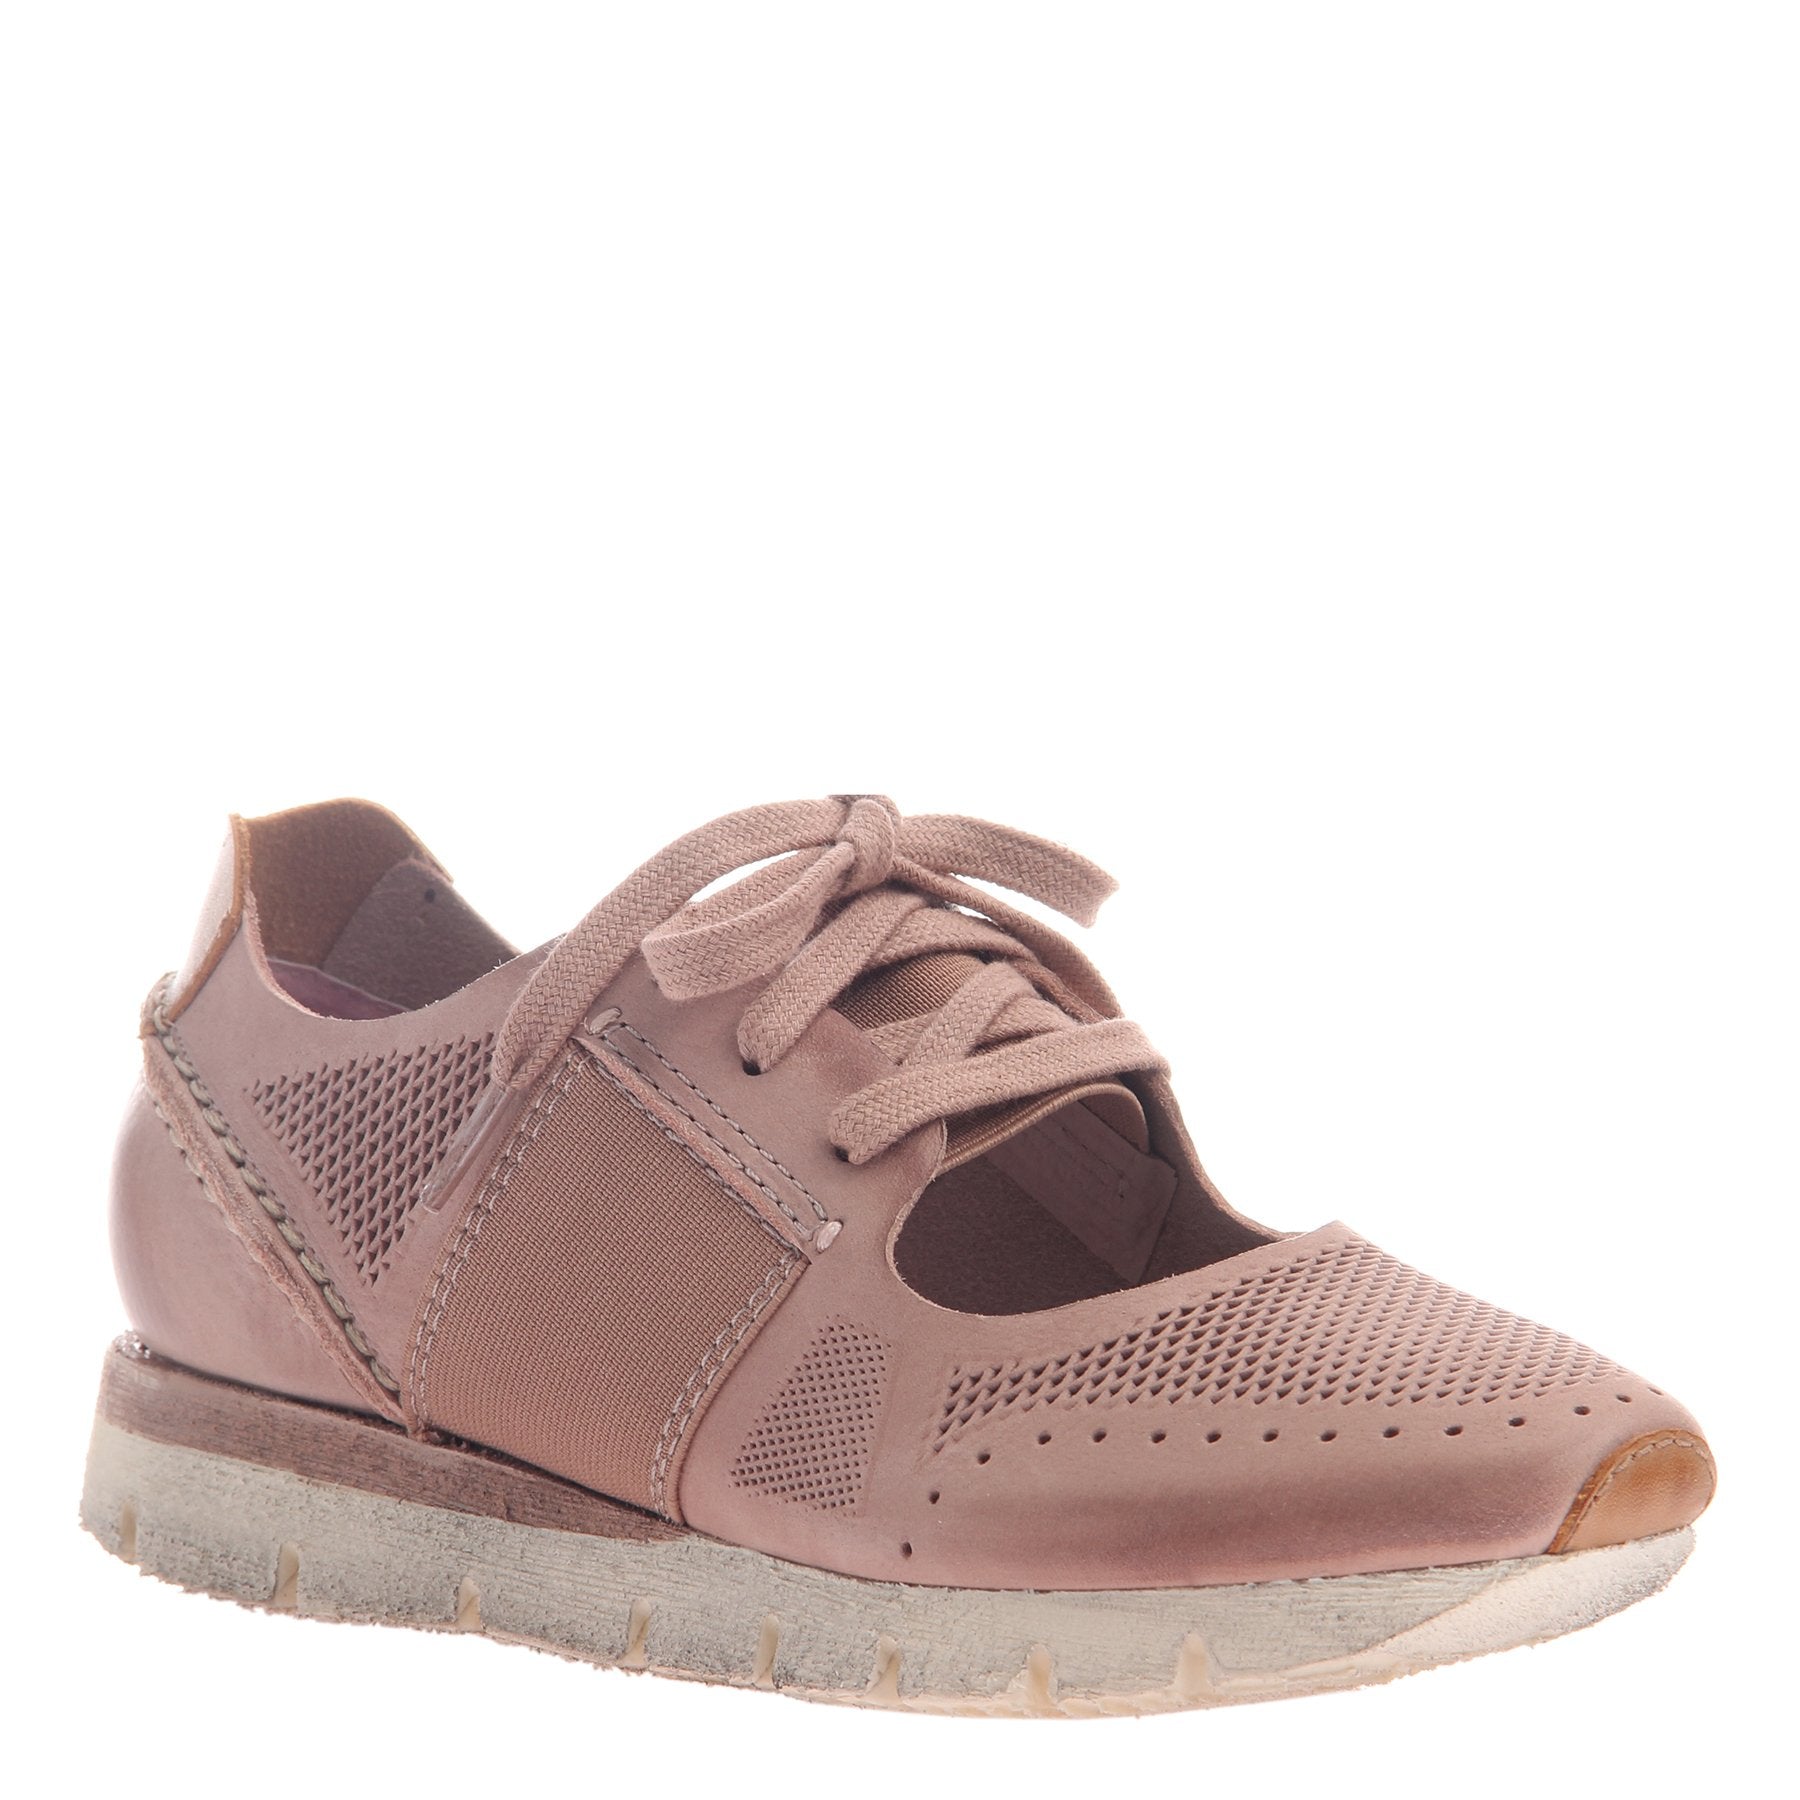 blush colored women's sneakers